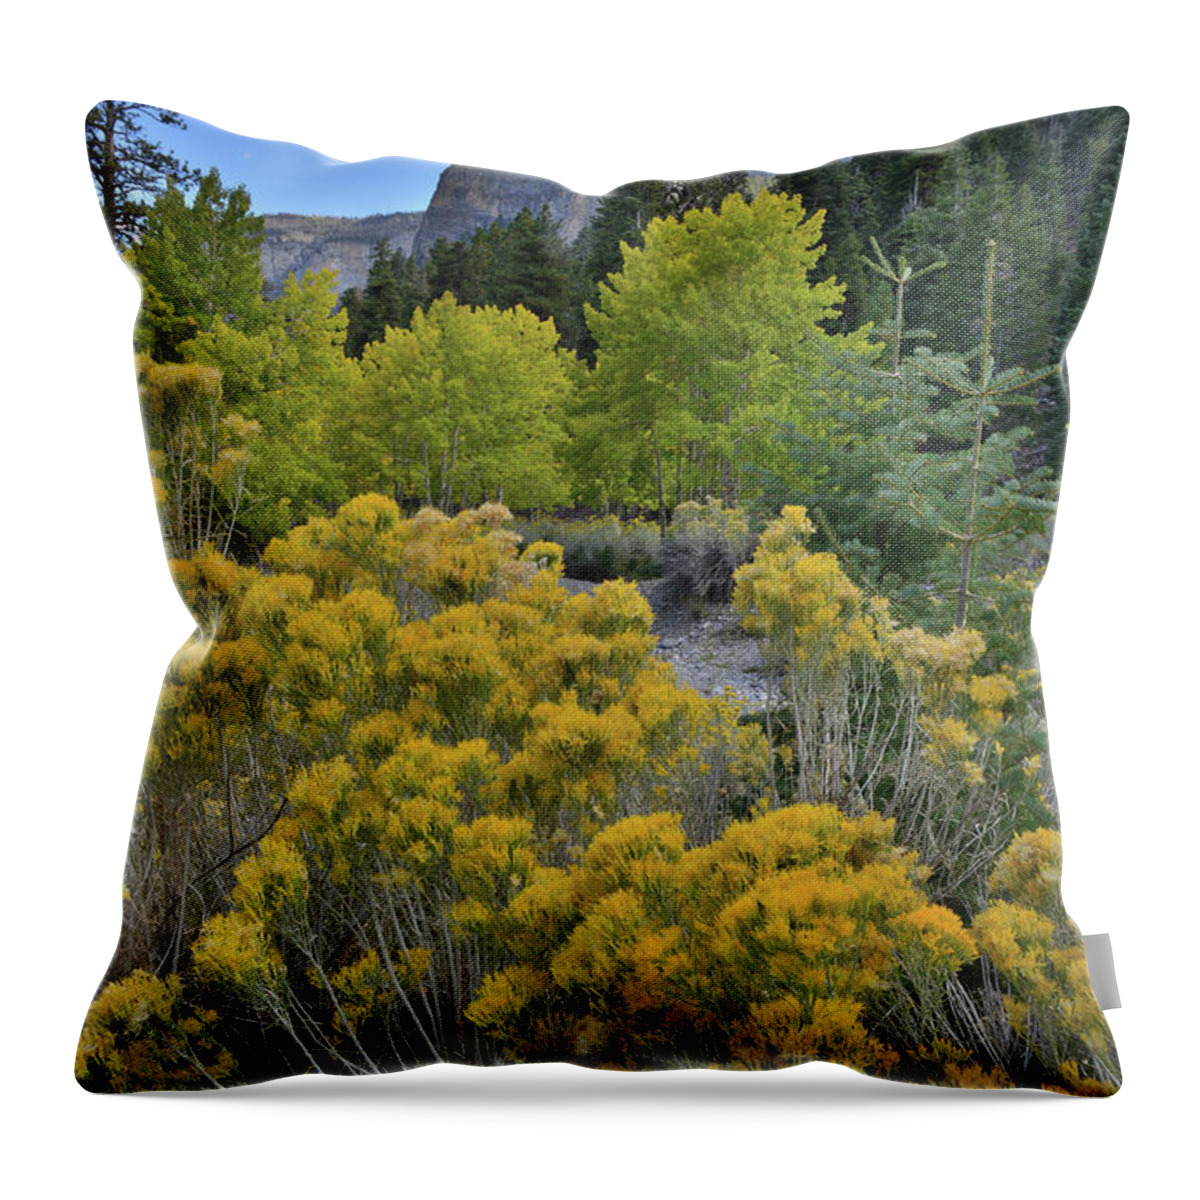 Humboldt-toiyabe National Forest Throw Pillow featuring the photograph Mt. Charleston - Humboldt National Forest by Ray Mathis